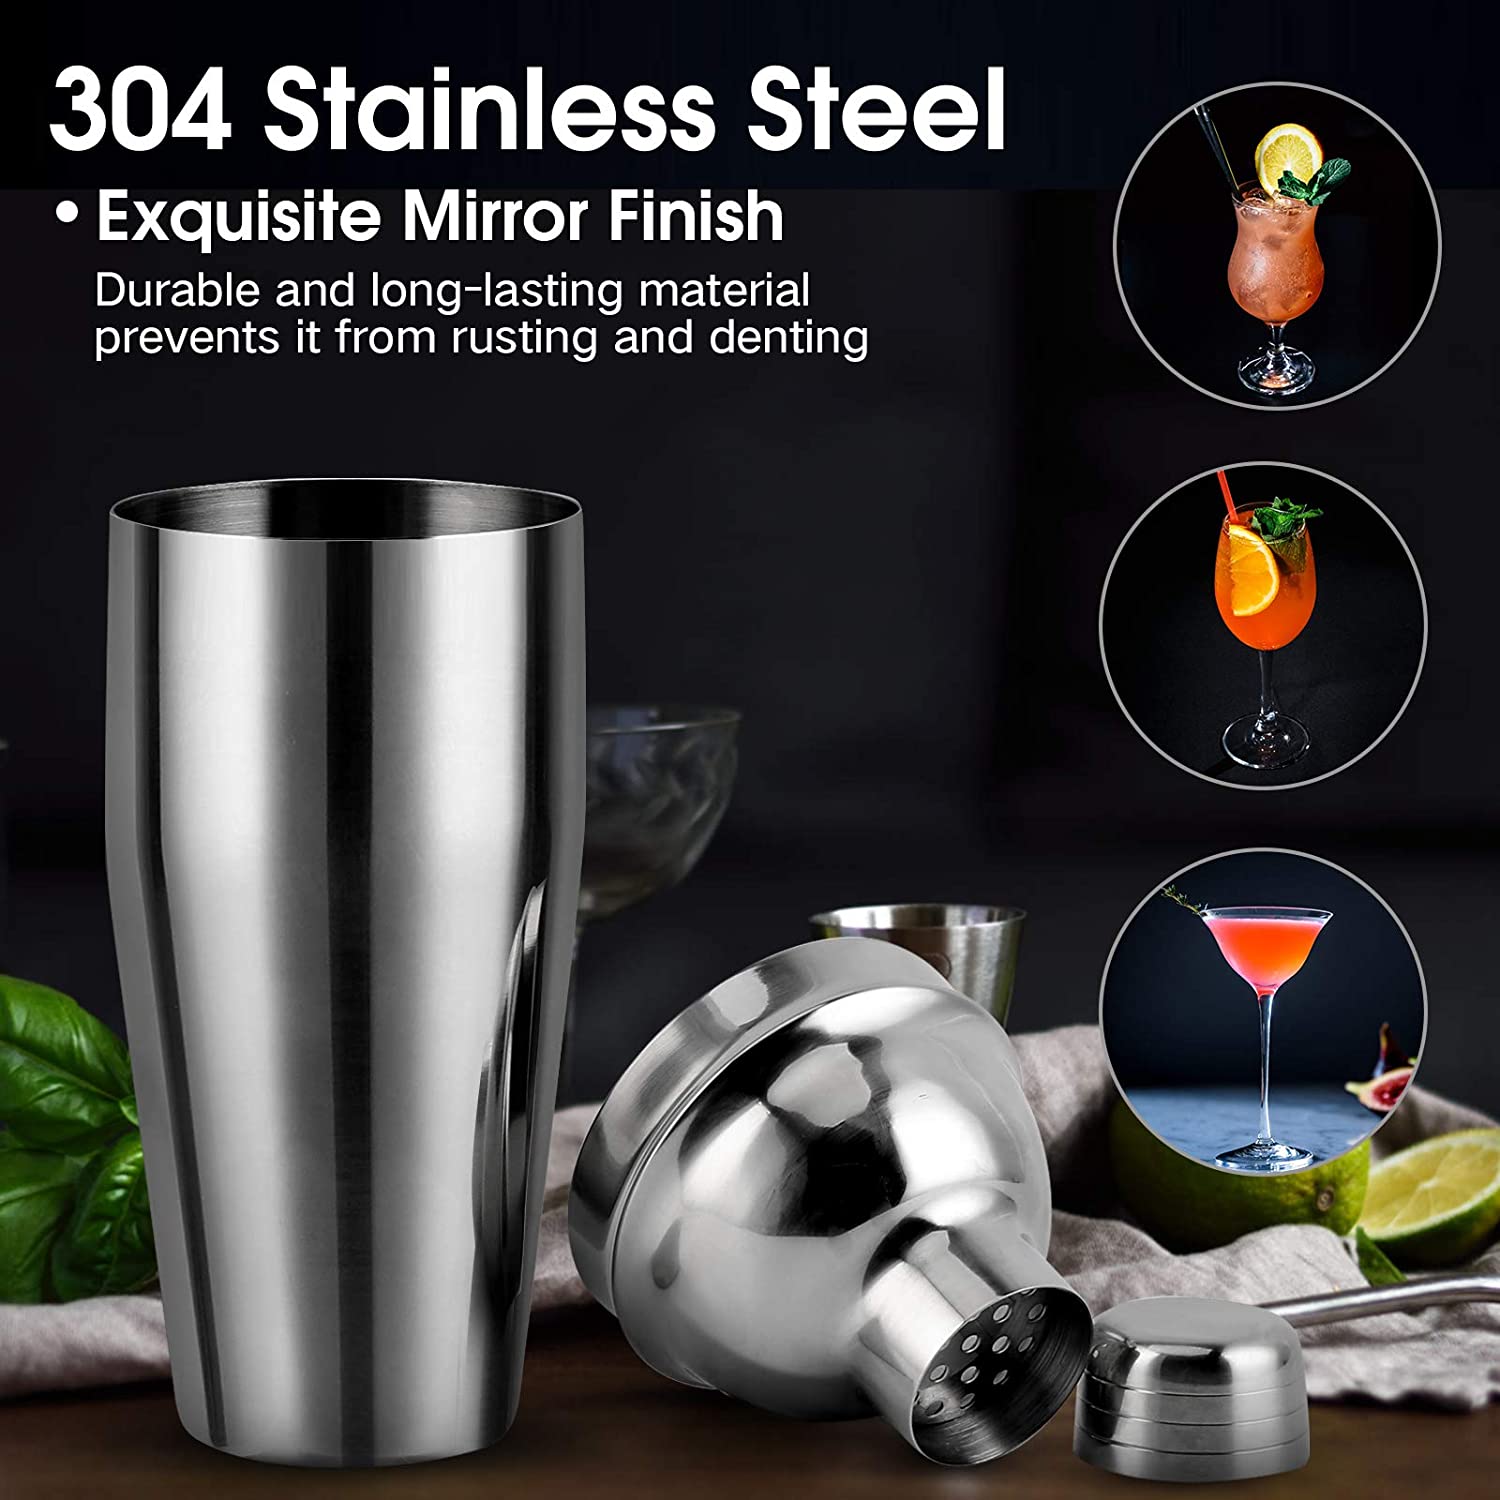 Buy Wholesale China Cocktail Shaker Set Bartender Kit With Stand